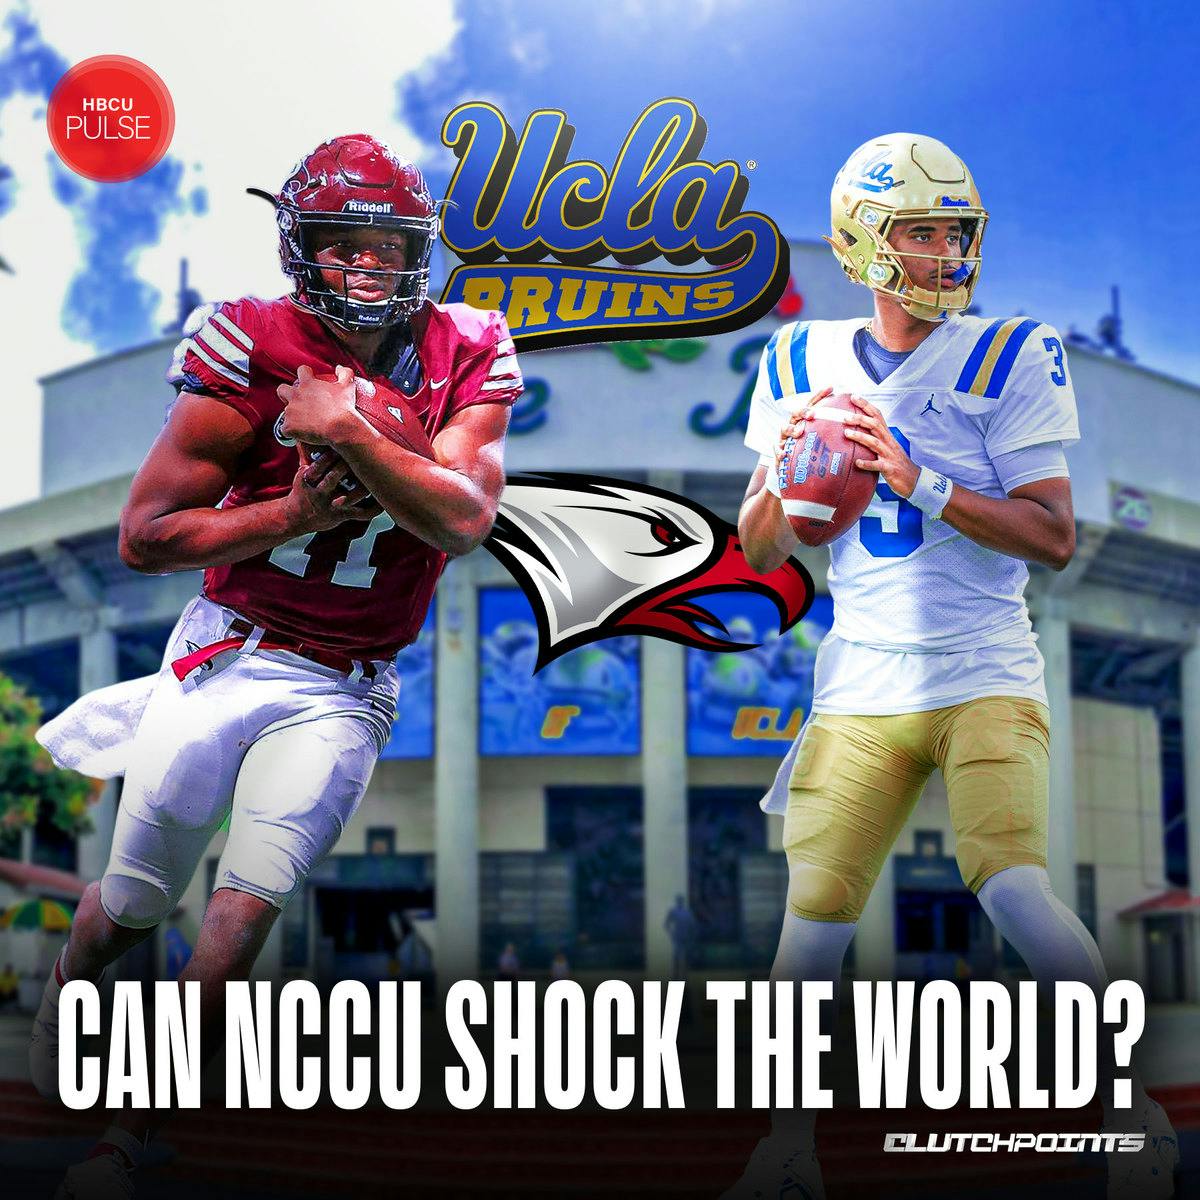 Can NCCU beat UCLA, Jackson State wins over Southern, Week 3 predictions